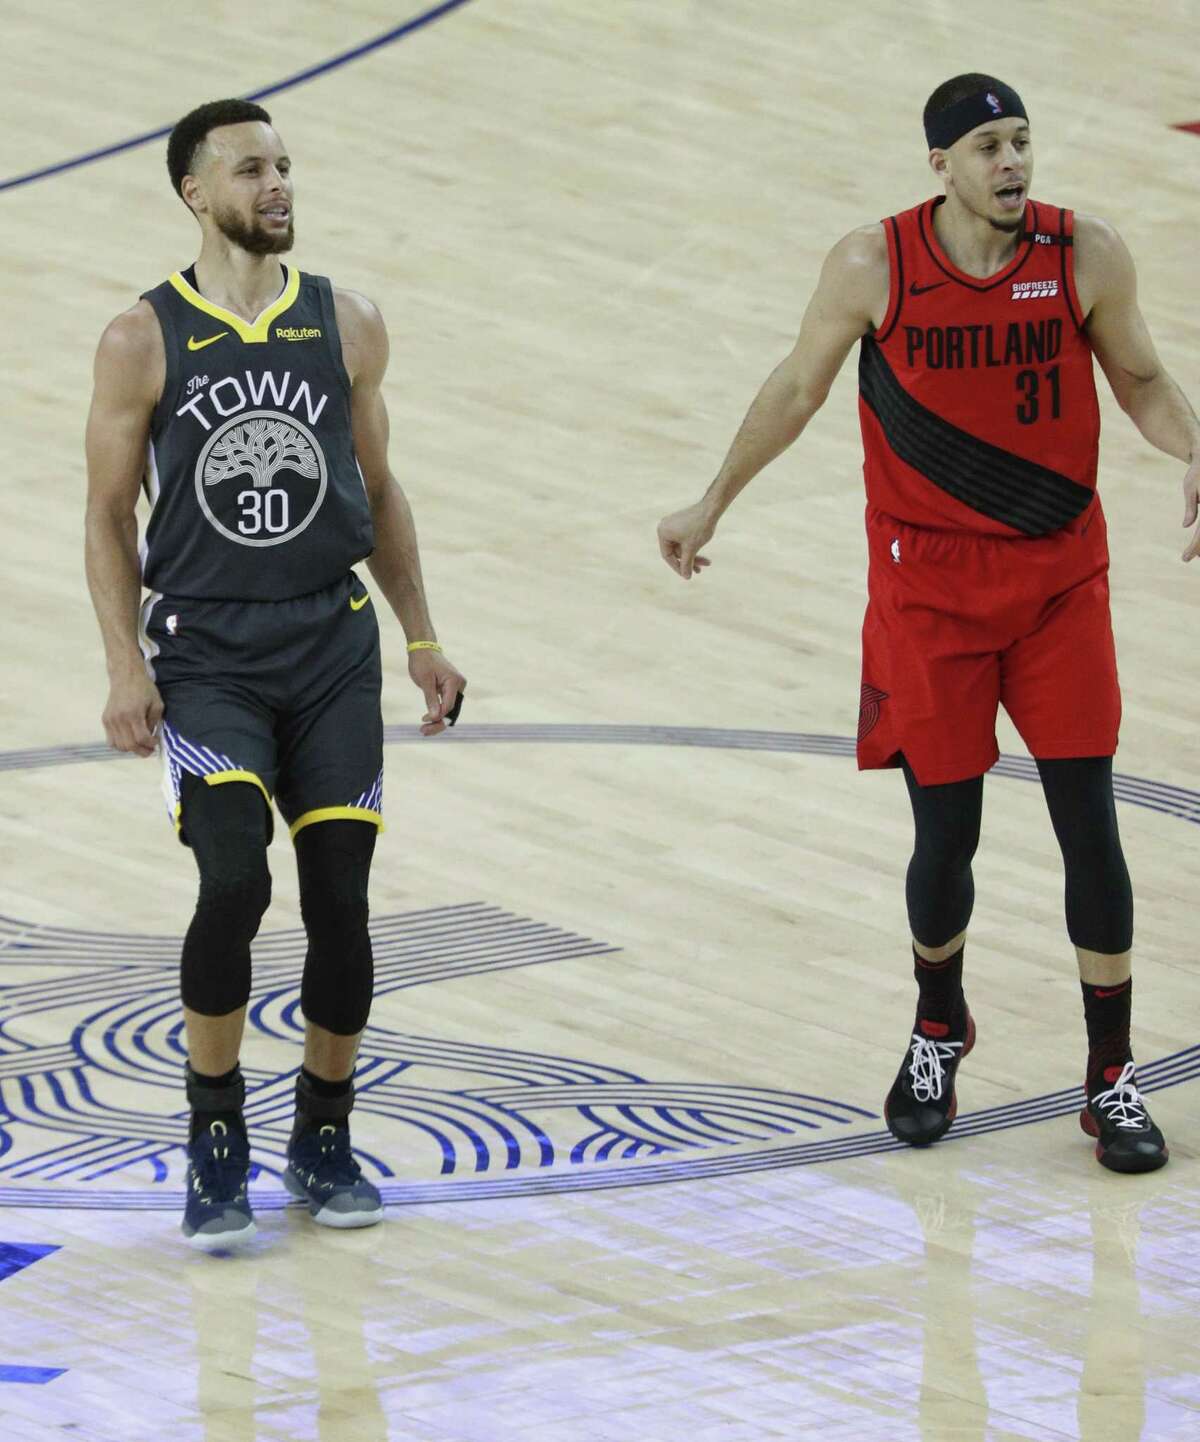 Golden State Warriors’ Stephen Curry and Portland Trail Blazers’ Seth Curry watch the results of Curry’s shot in the third quarter during game 2 of the Western Conference Finals between the Golden State Warriors and the Portland Trail Blazers at Oracle Arena on Thursday, May 16, 2019 in Oakland, Calif.